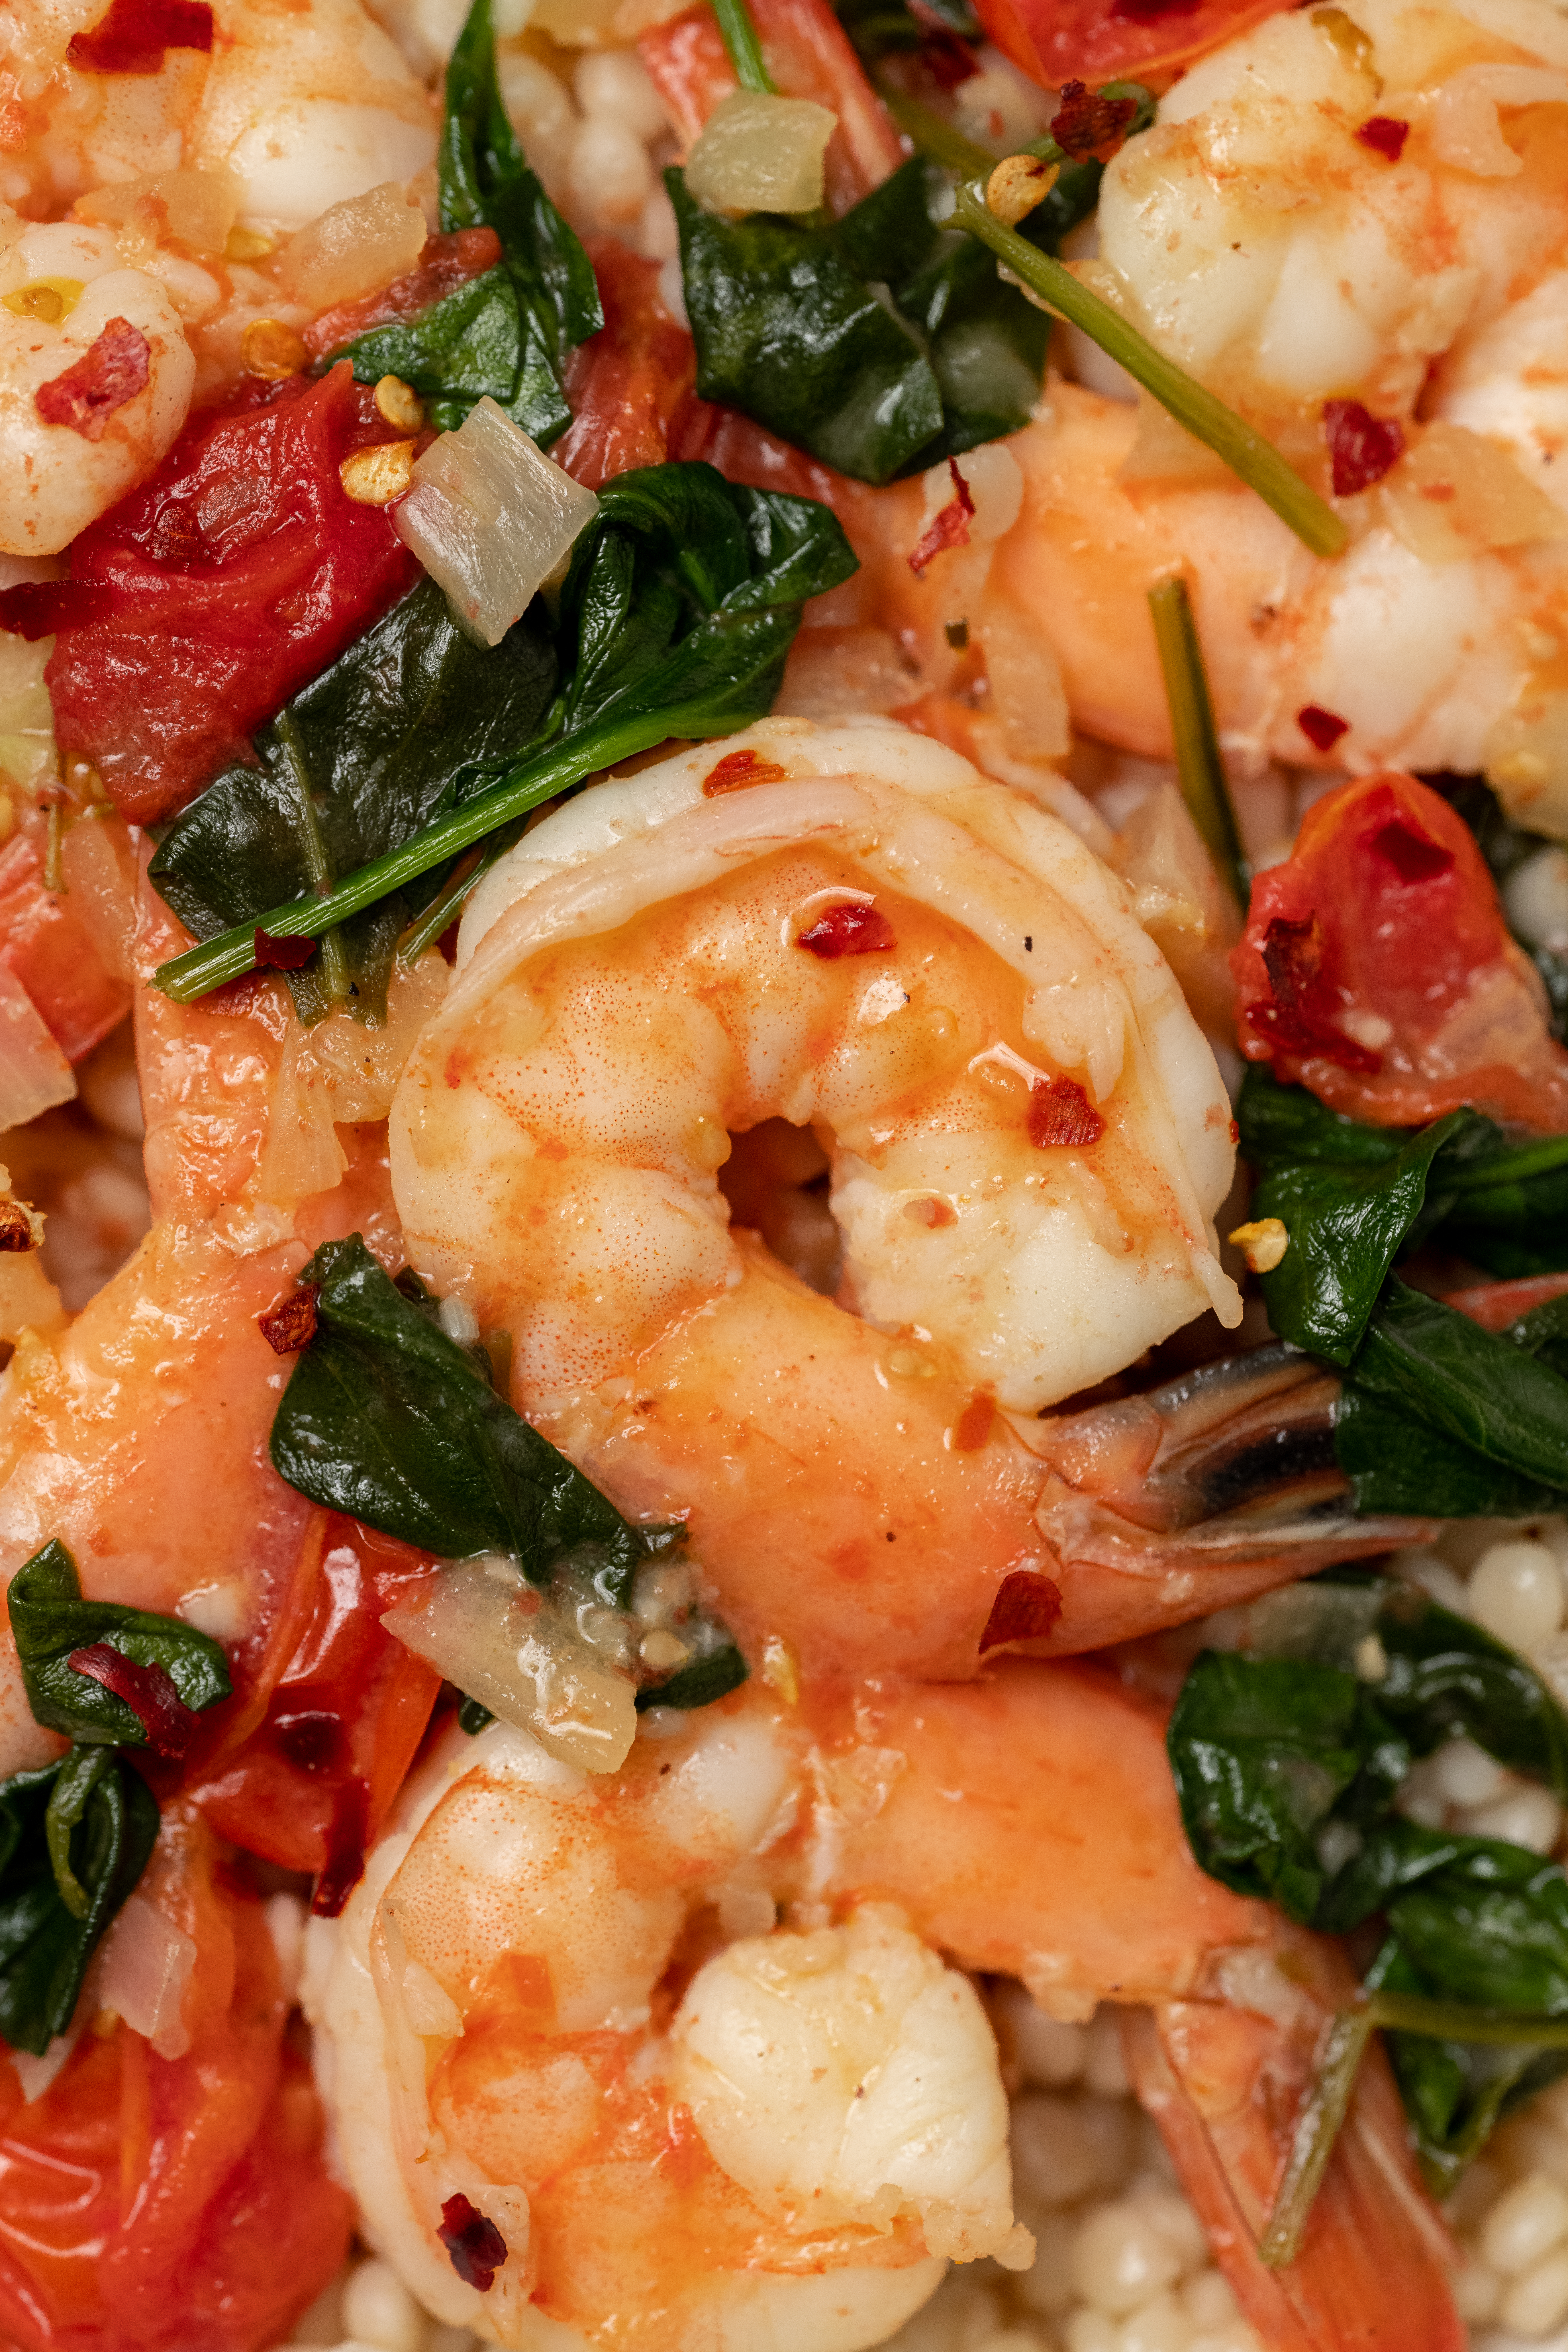 Prawns, spinach and tomatoes in a lemon garlic cream sauce with couscous